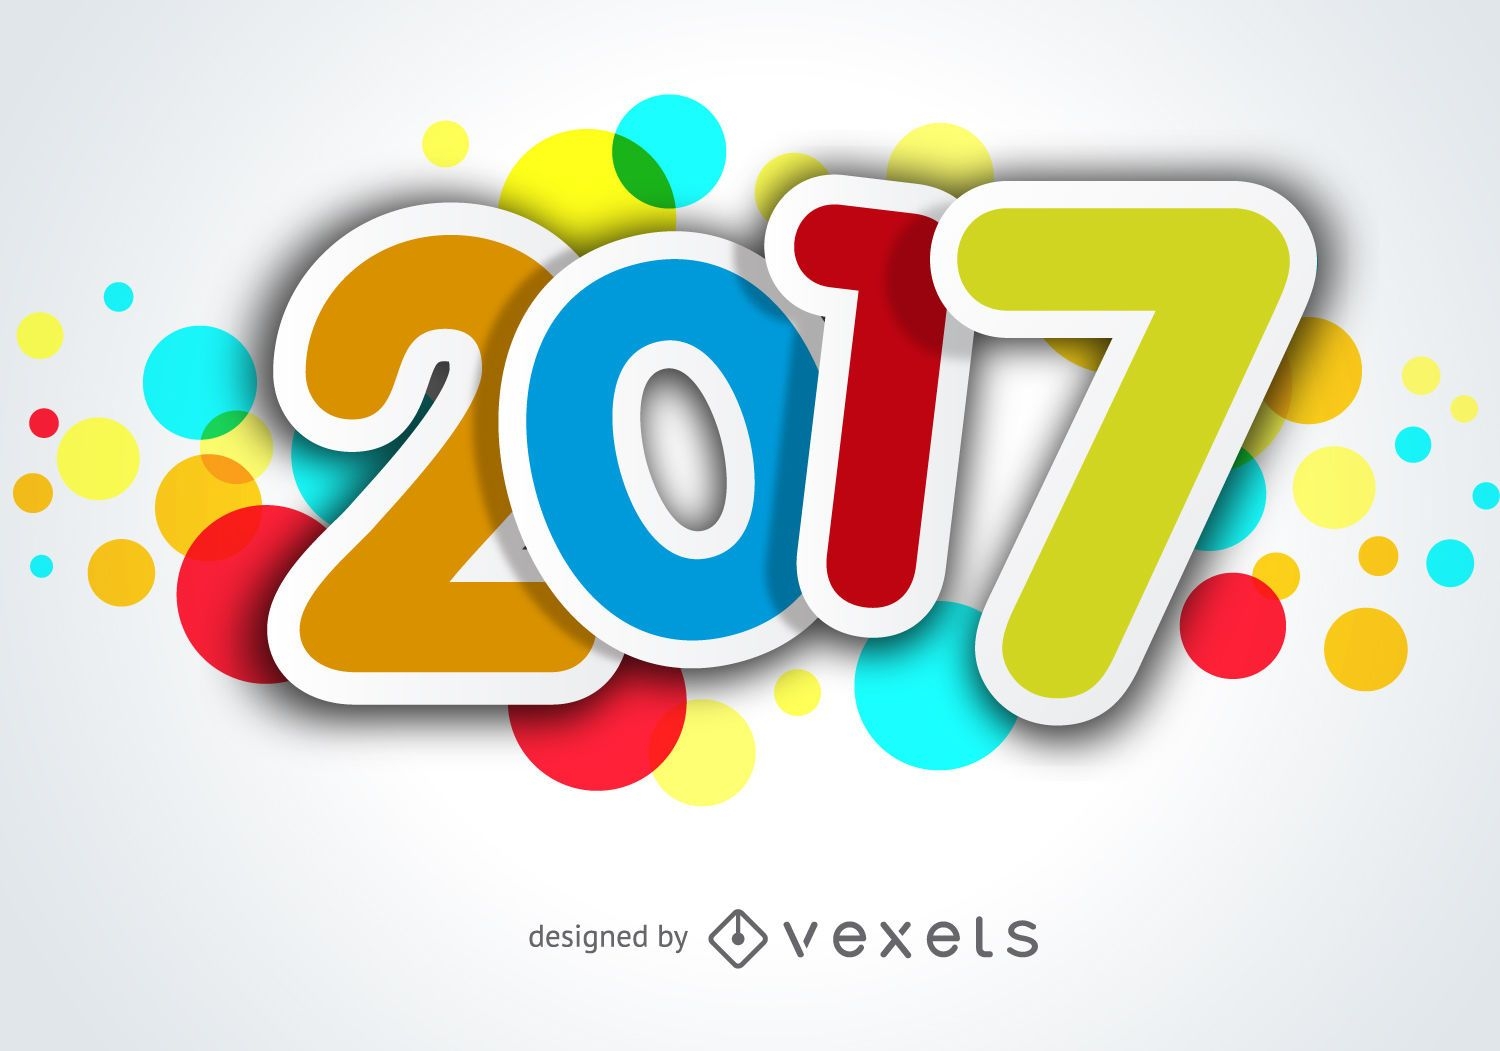 Colorful 2017 sticker sign